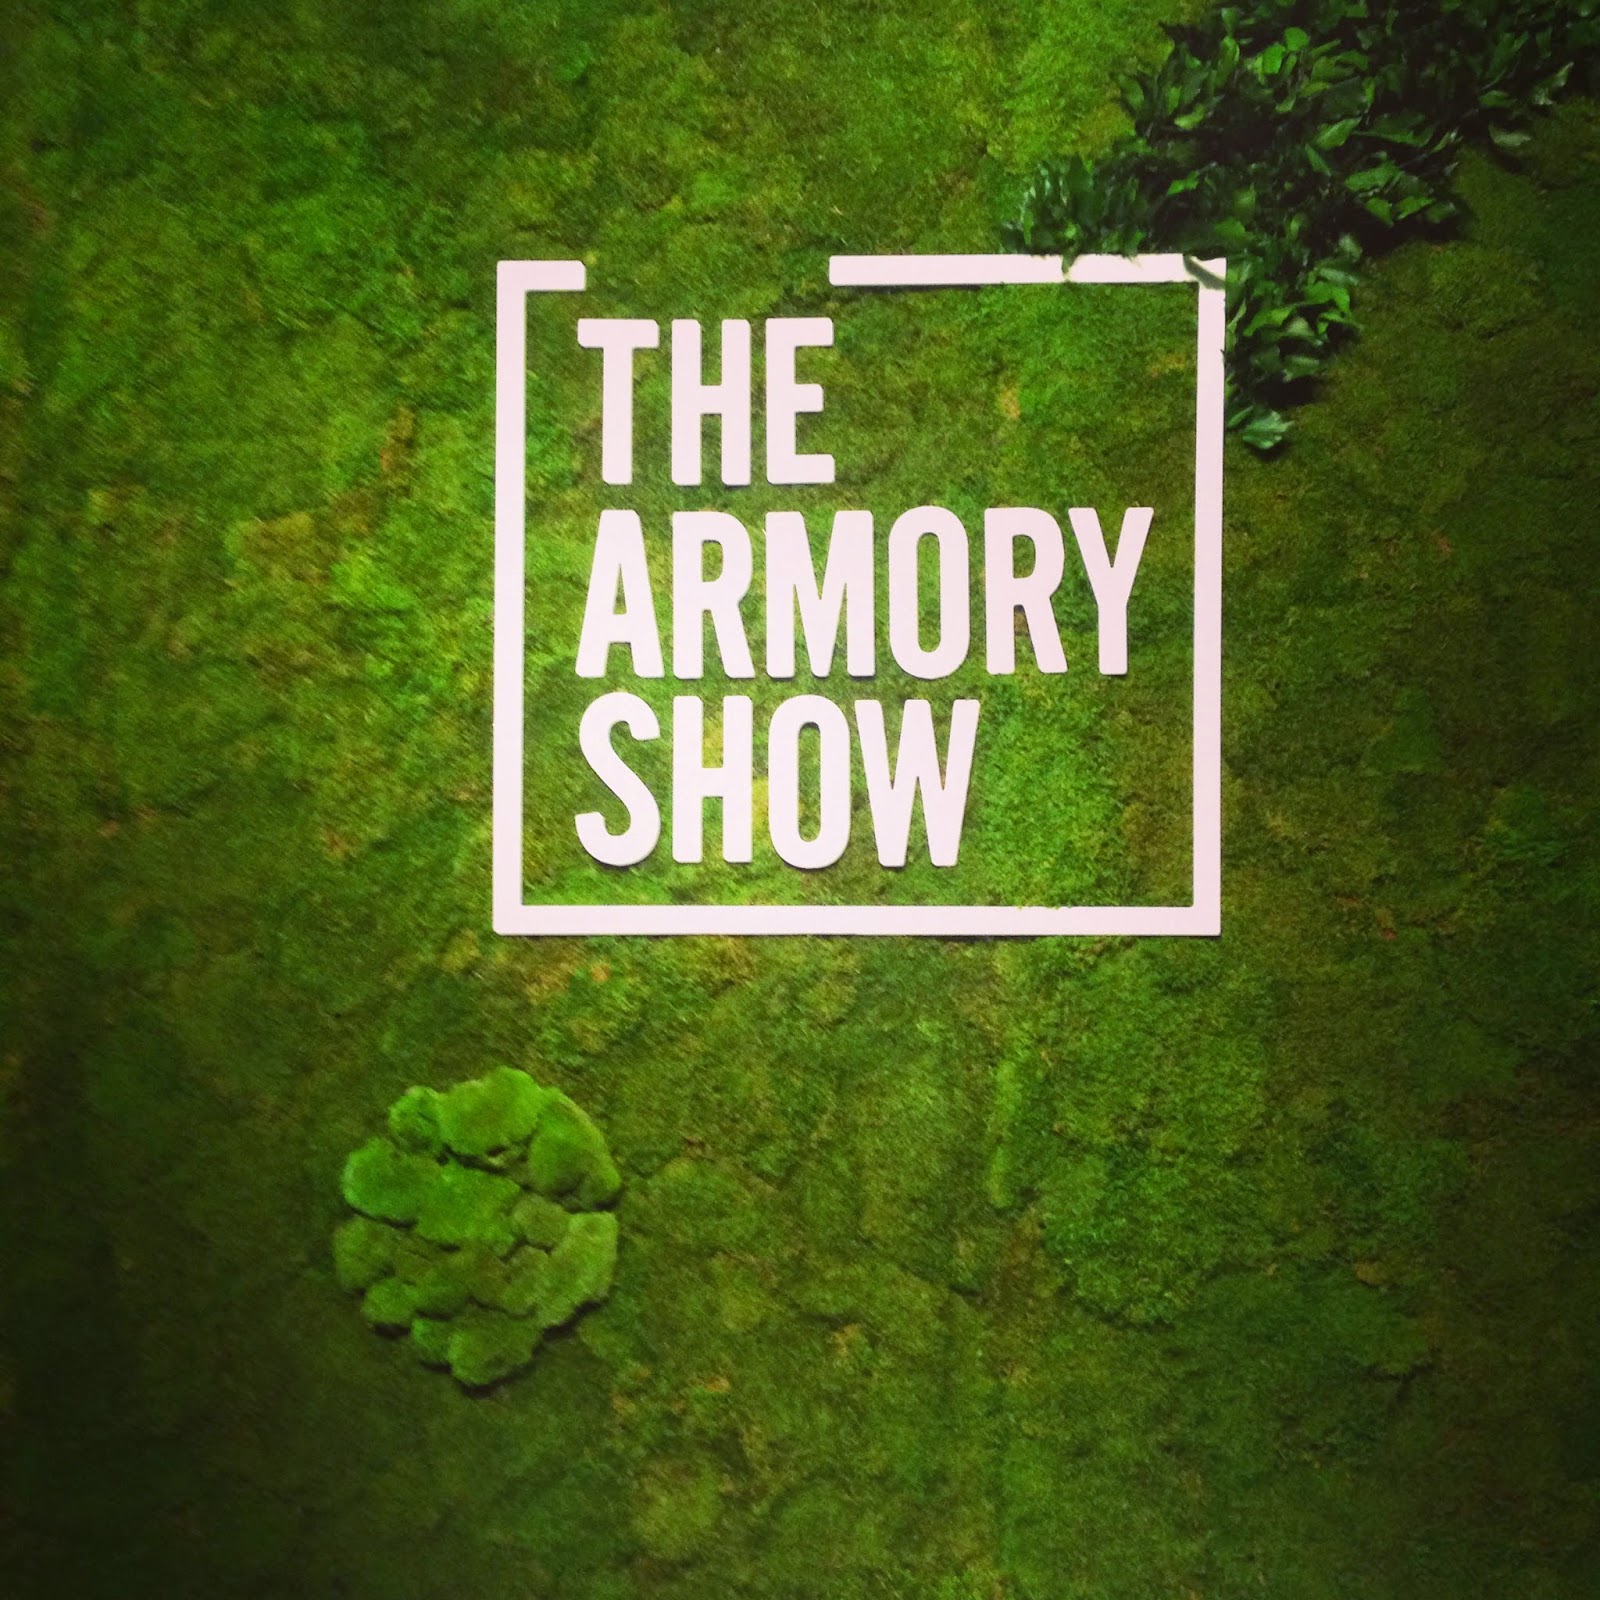 The Armory Show 2015 in NY